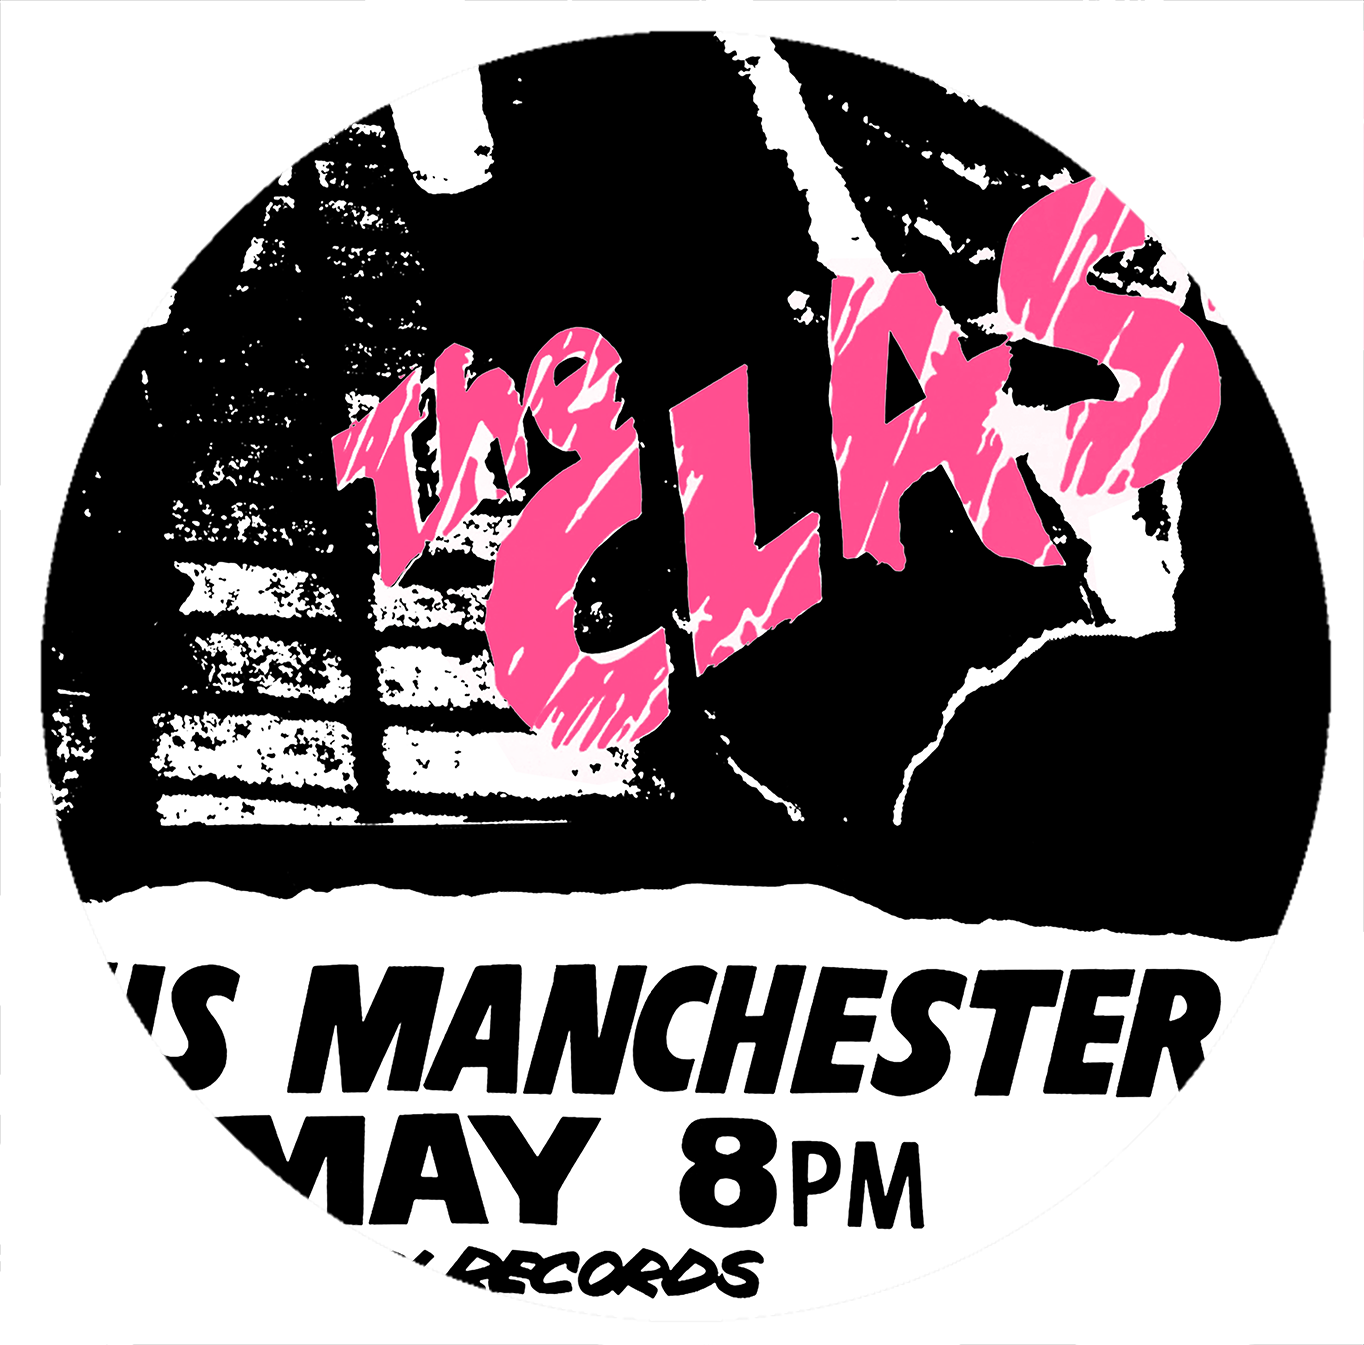 THE CLASH - MANCHESTER - ELECTRIC CIRCUS - 1977 - UK Concert Poster